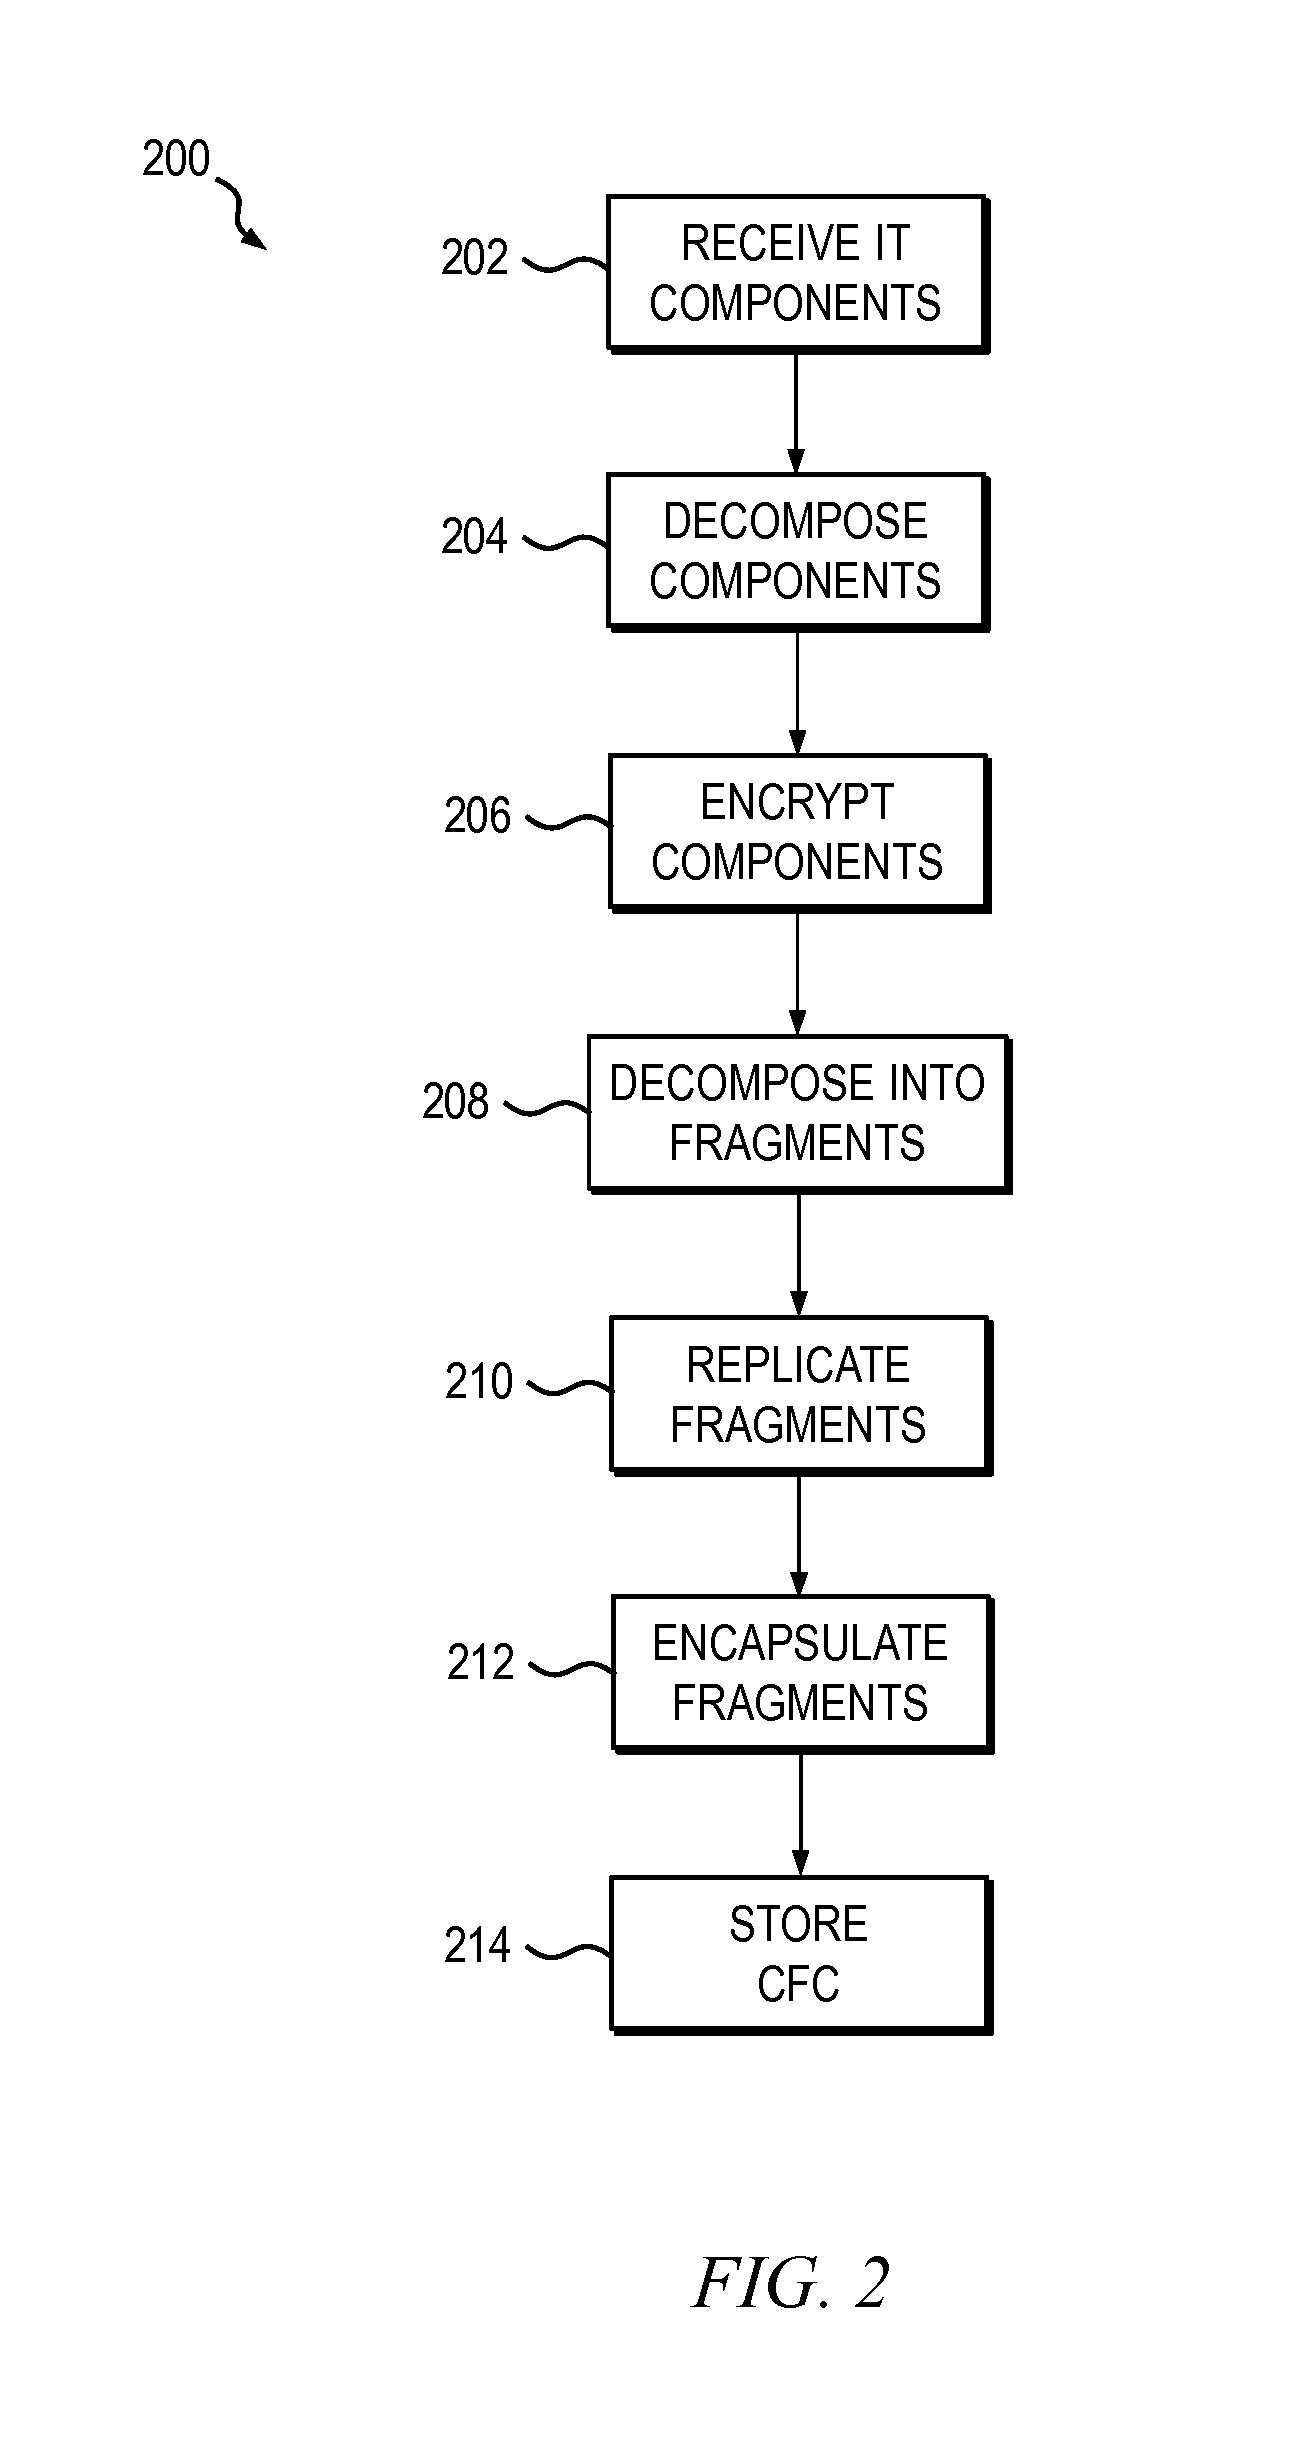 Methods and apparatus for enhancing business services resiliency using continuous fragmentation cell technology